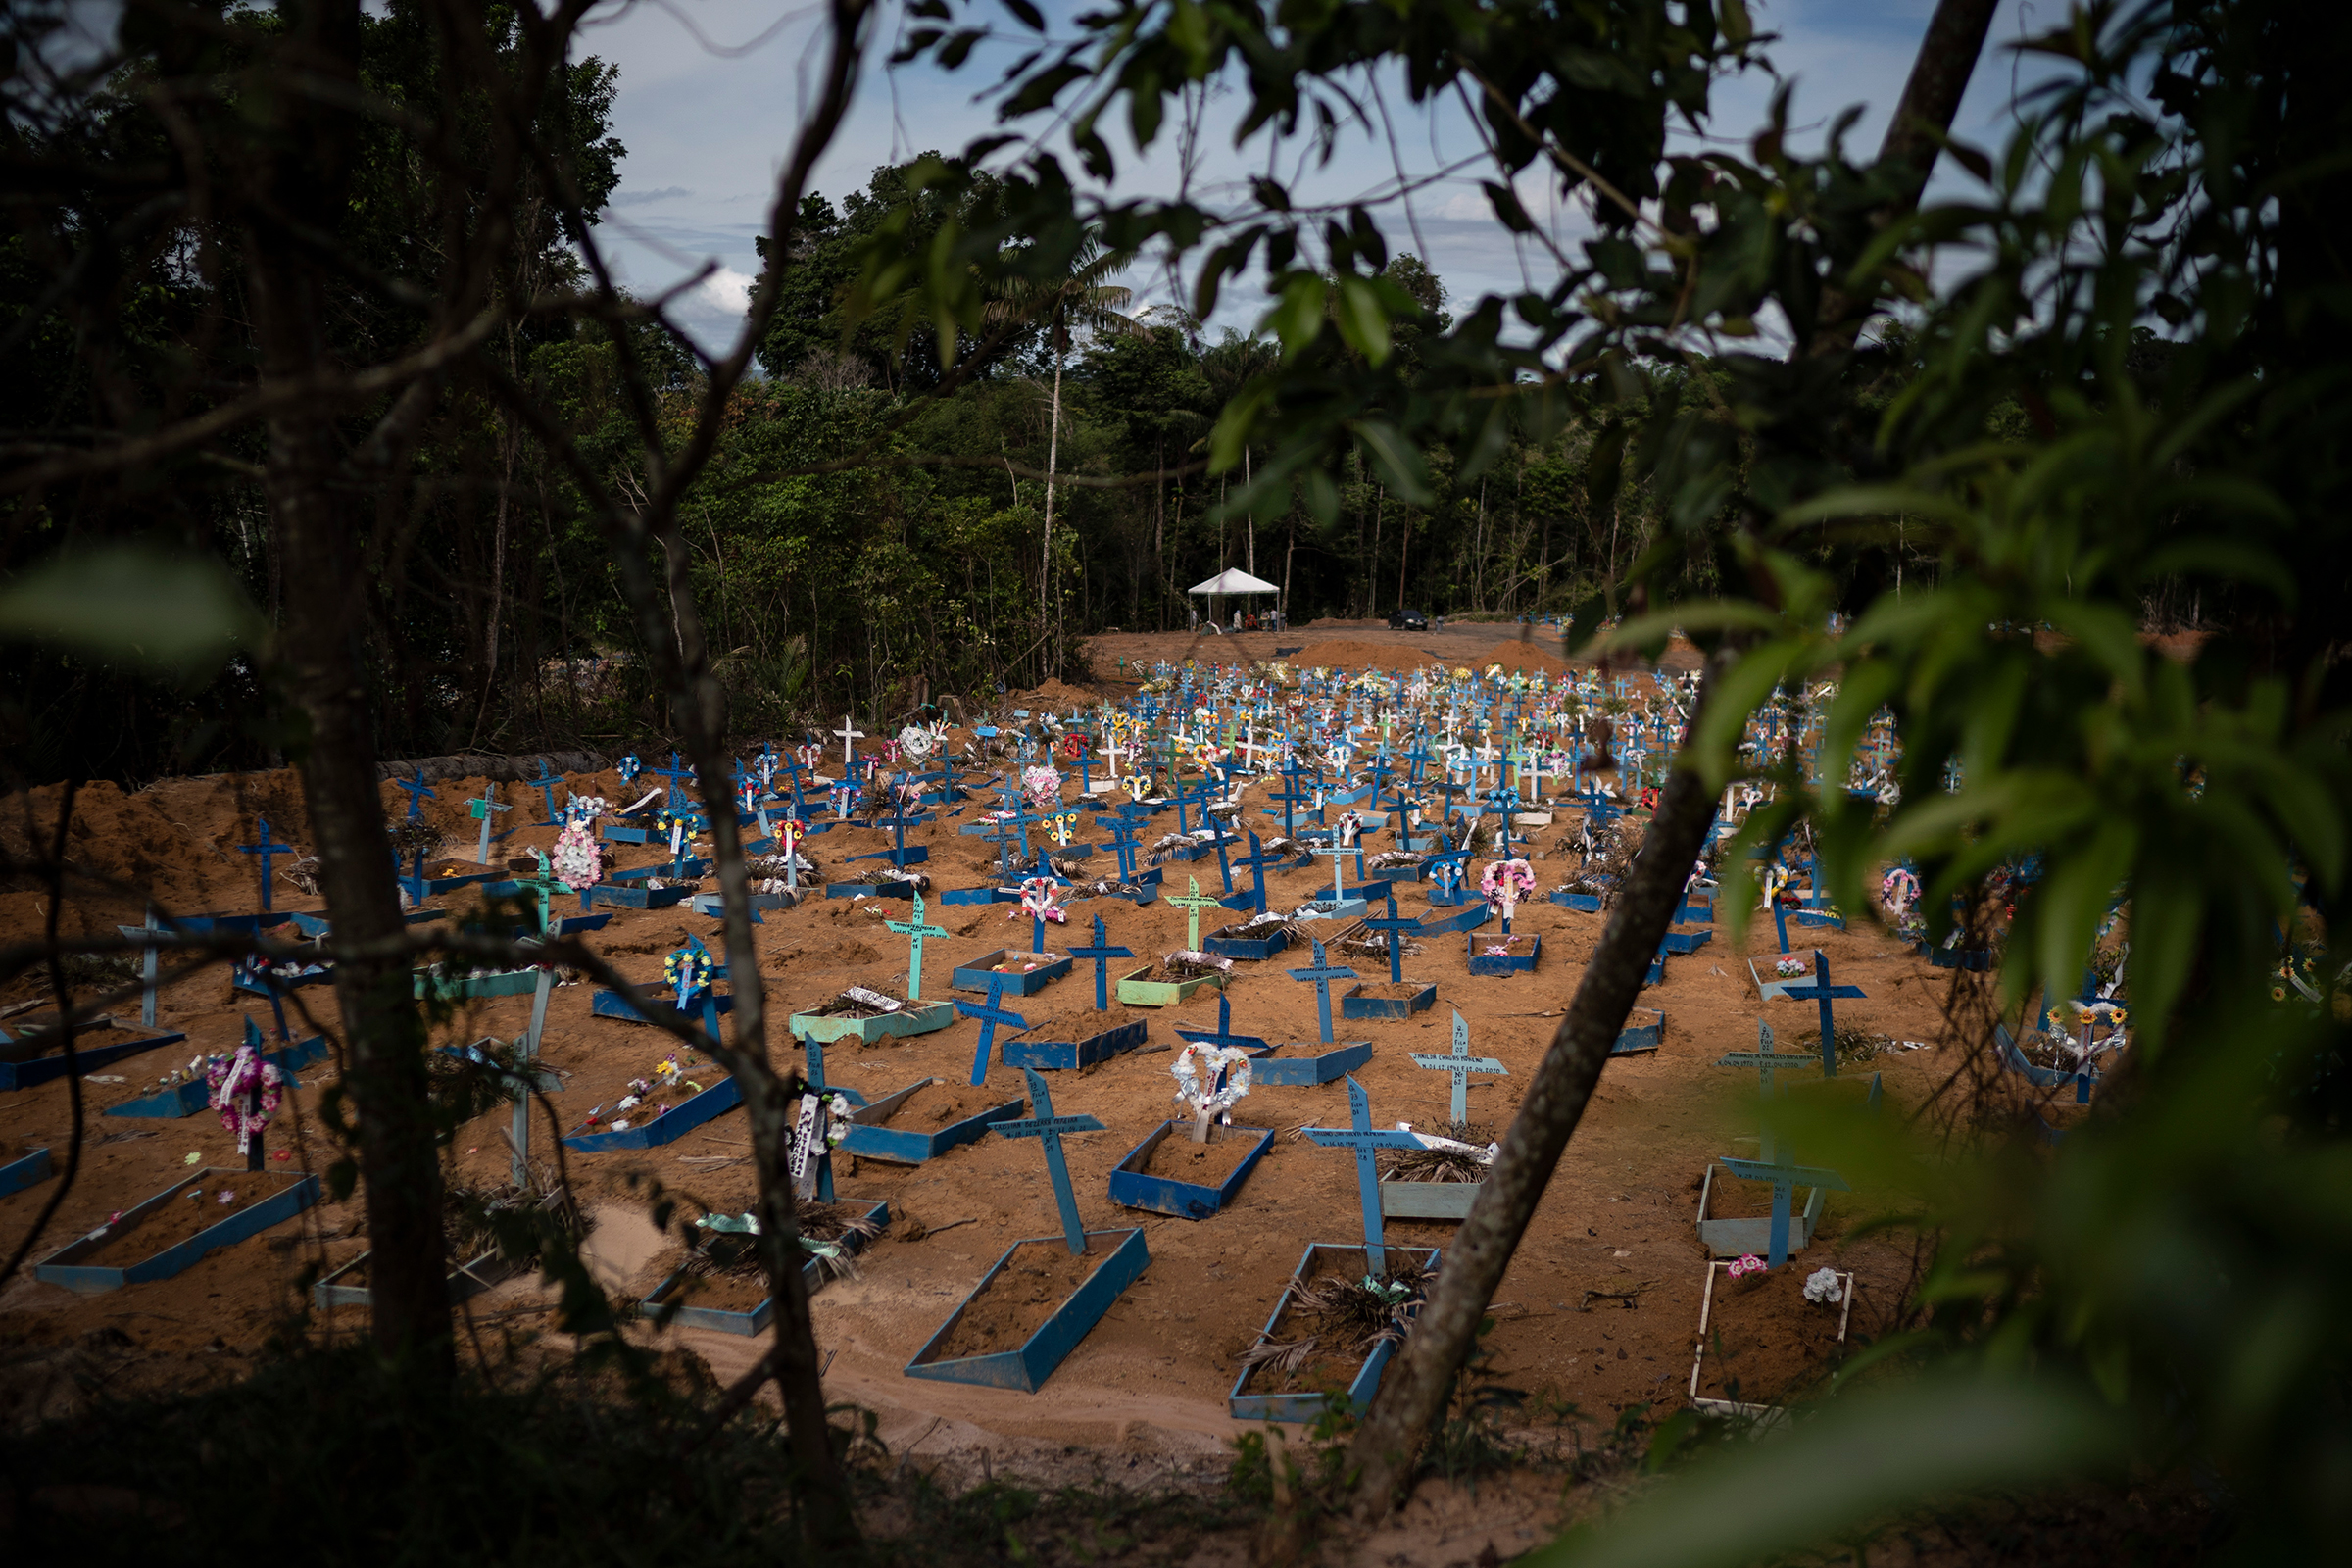 Graves of people who died in the past 30 days fill a new section of the Nossa Senhora Aparecida cemetery in Manaus, Brazil, on May 11, 2020. The new section was opened last month to cope with a sudden surge in deaths. (Felipe Dana—AP)